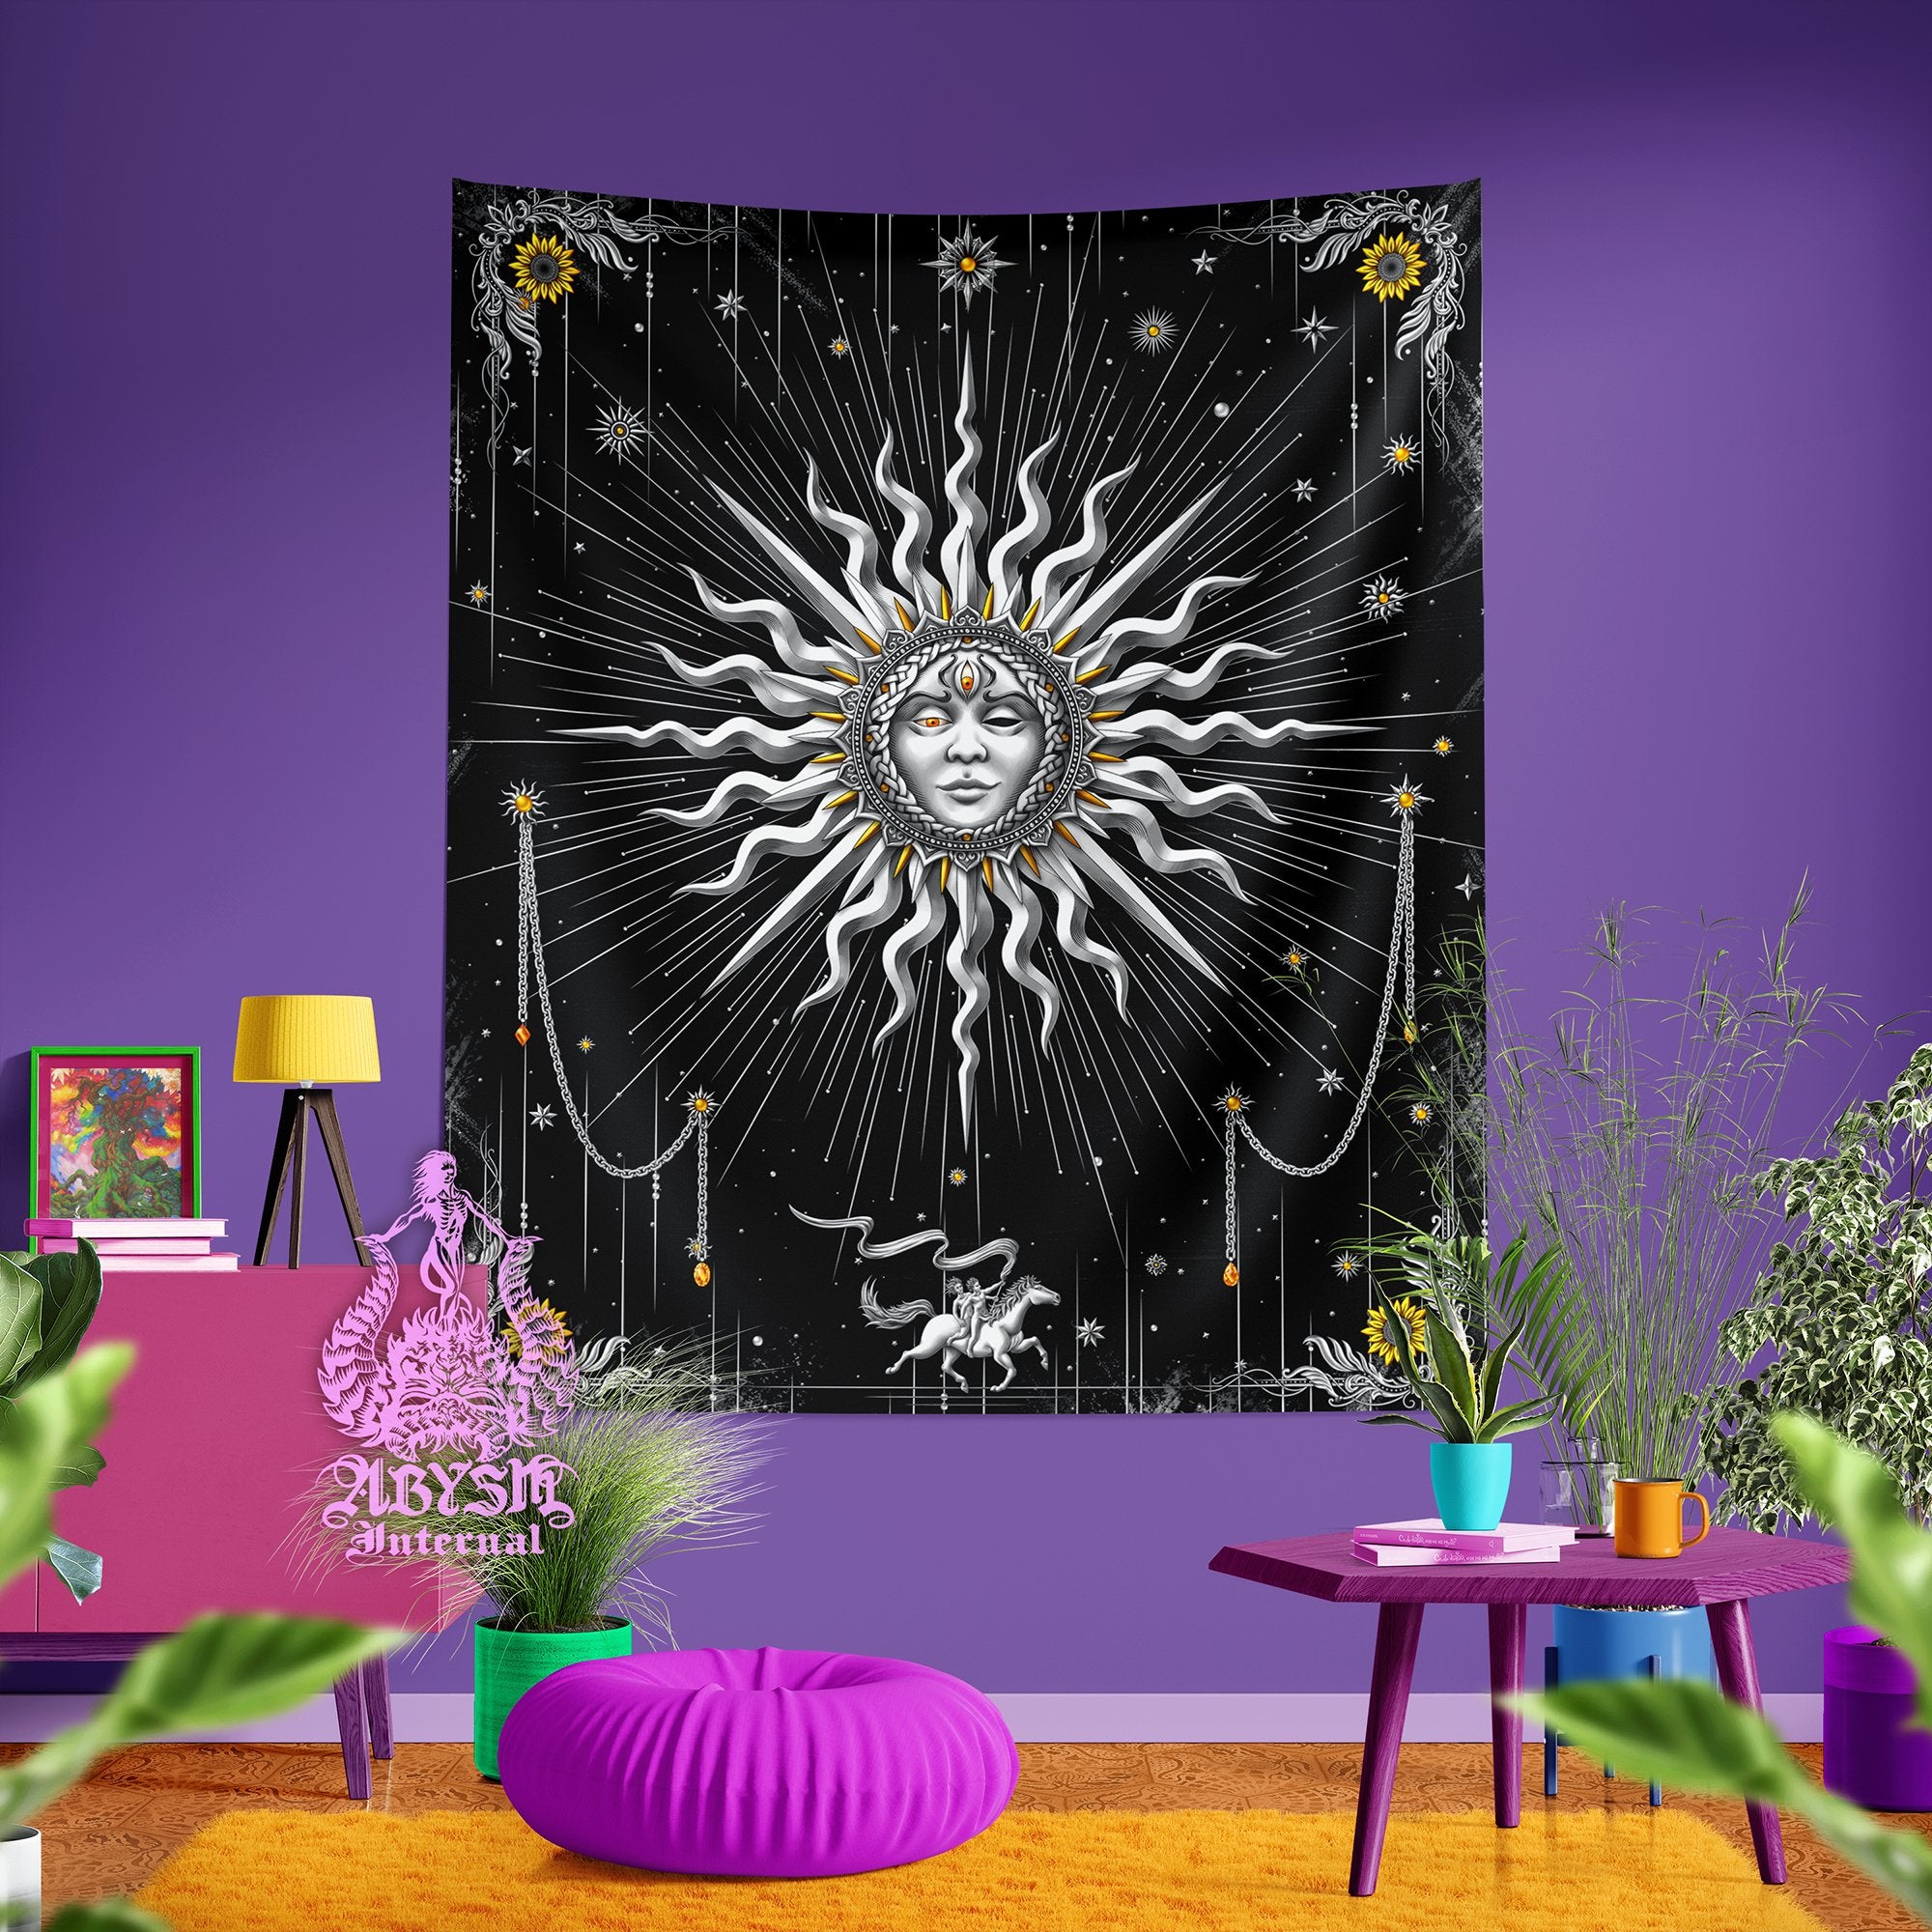 Silver Sun Tapestry, Tarot Card Arcana Wall Hanging, Esoteric and Magic Art, Indie and Boho Home Decor, Vertical Print - 7 Colors - Abysm Internal